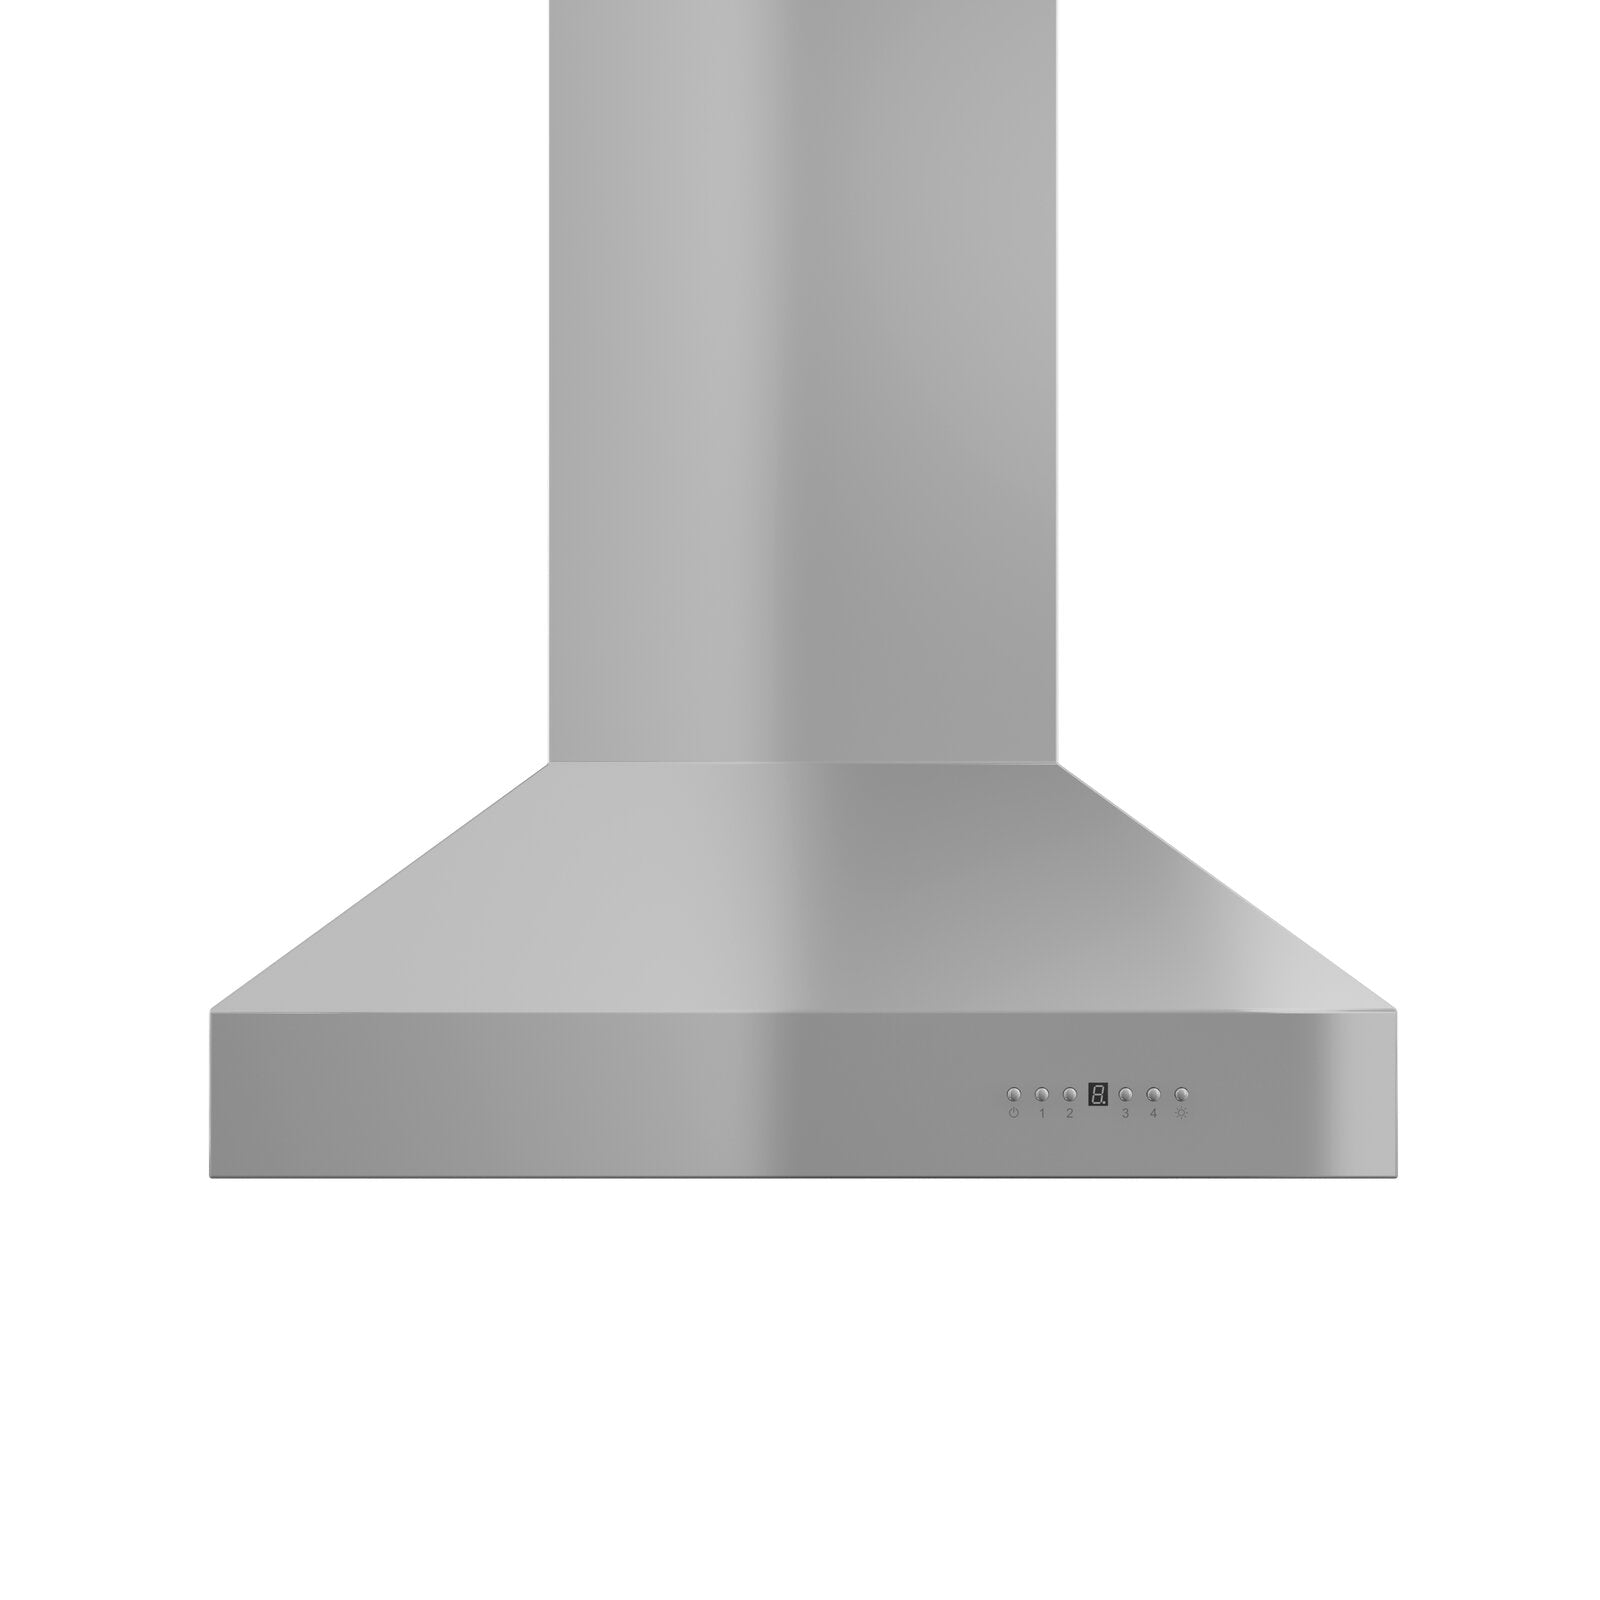 36" 1200 CFM Ducted Island Range Hood in Brushed 430 Stainless Steel K7561 (2 Boxes)